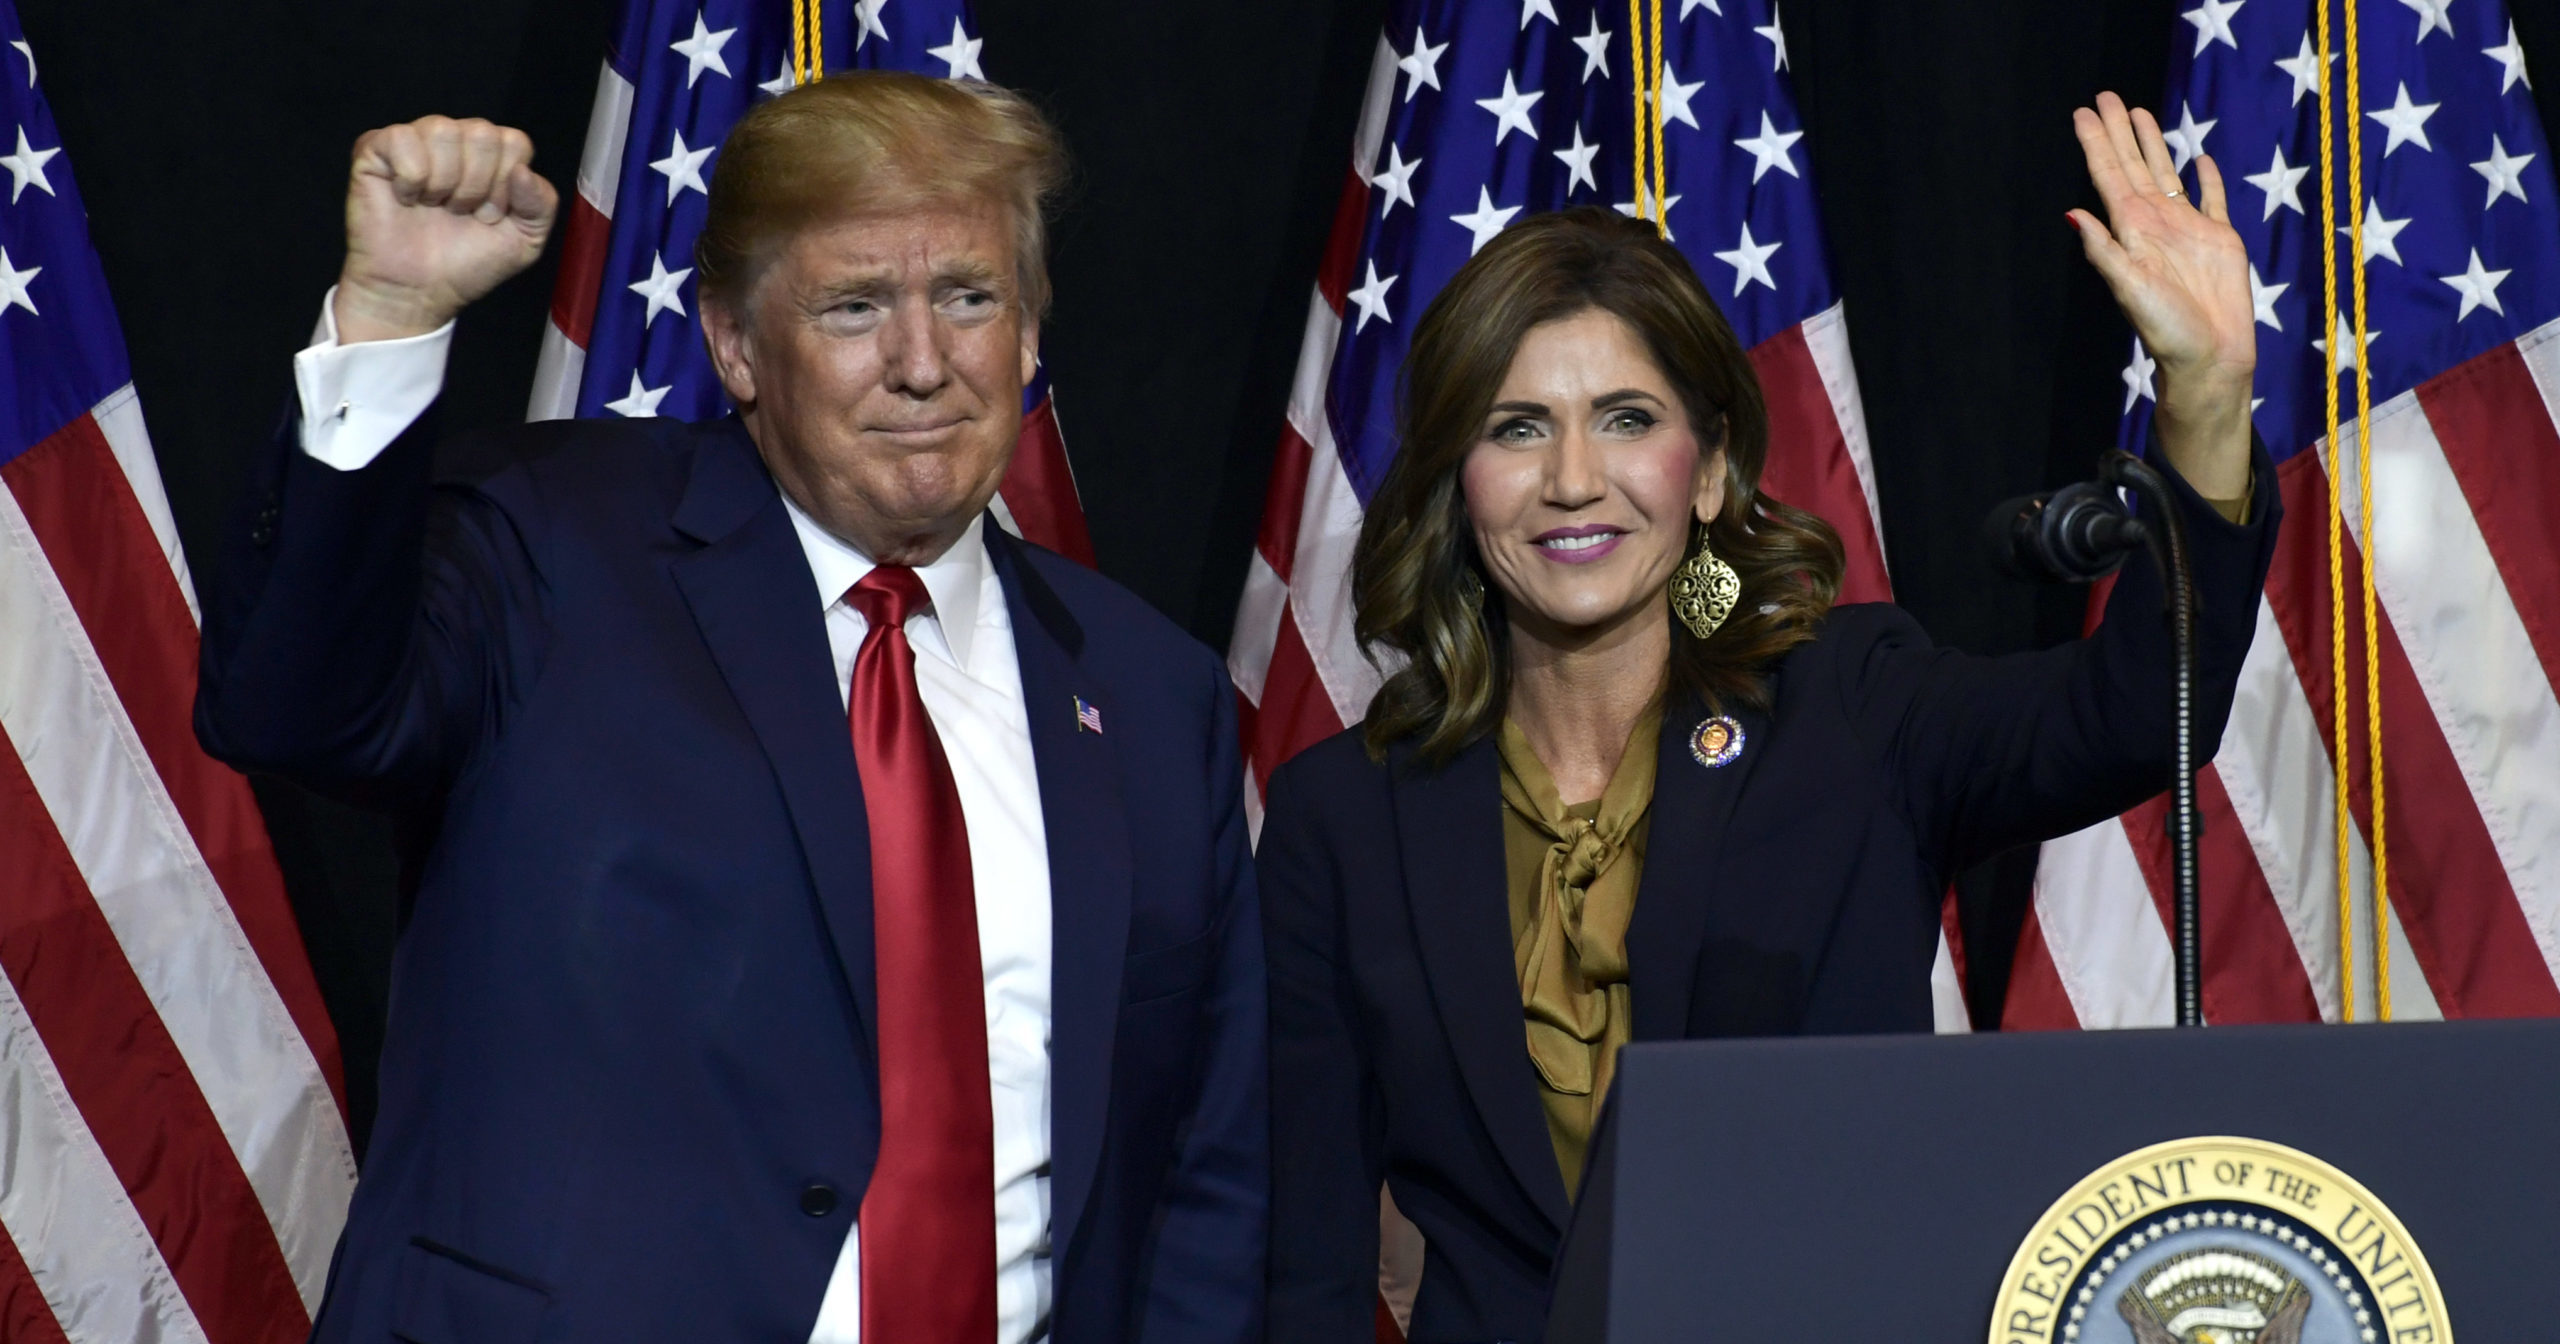 In this Sept. 7, 2018, file photo, President Donald Trump appears with Gov. Kristi Noem in Sioux Falls, South Dakota. Officials said on Aug. 12, 2020, that they plan to erect a security fence around the official governor’s residence to protect Noem.